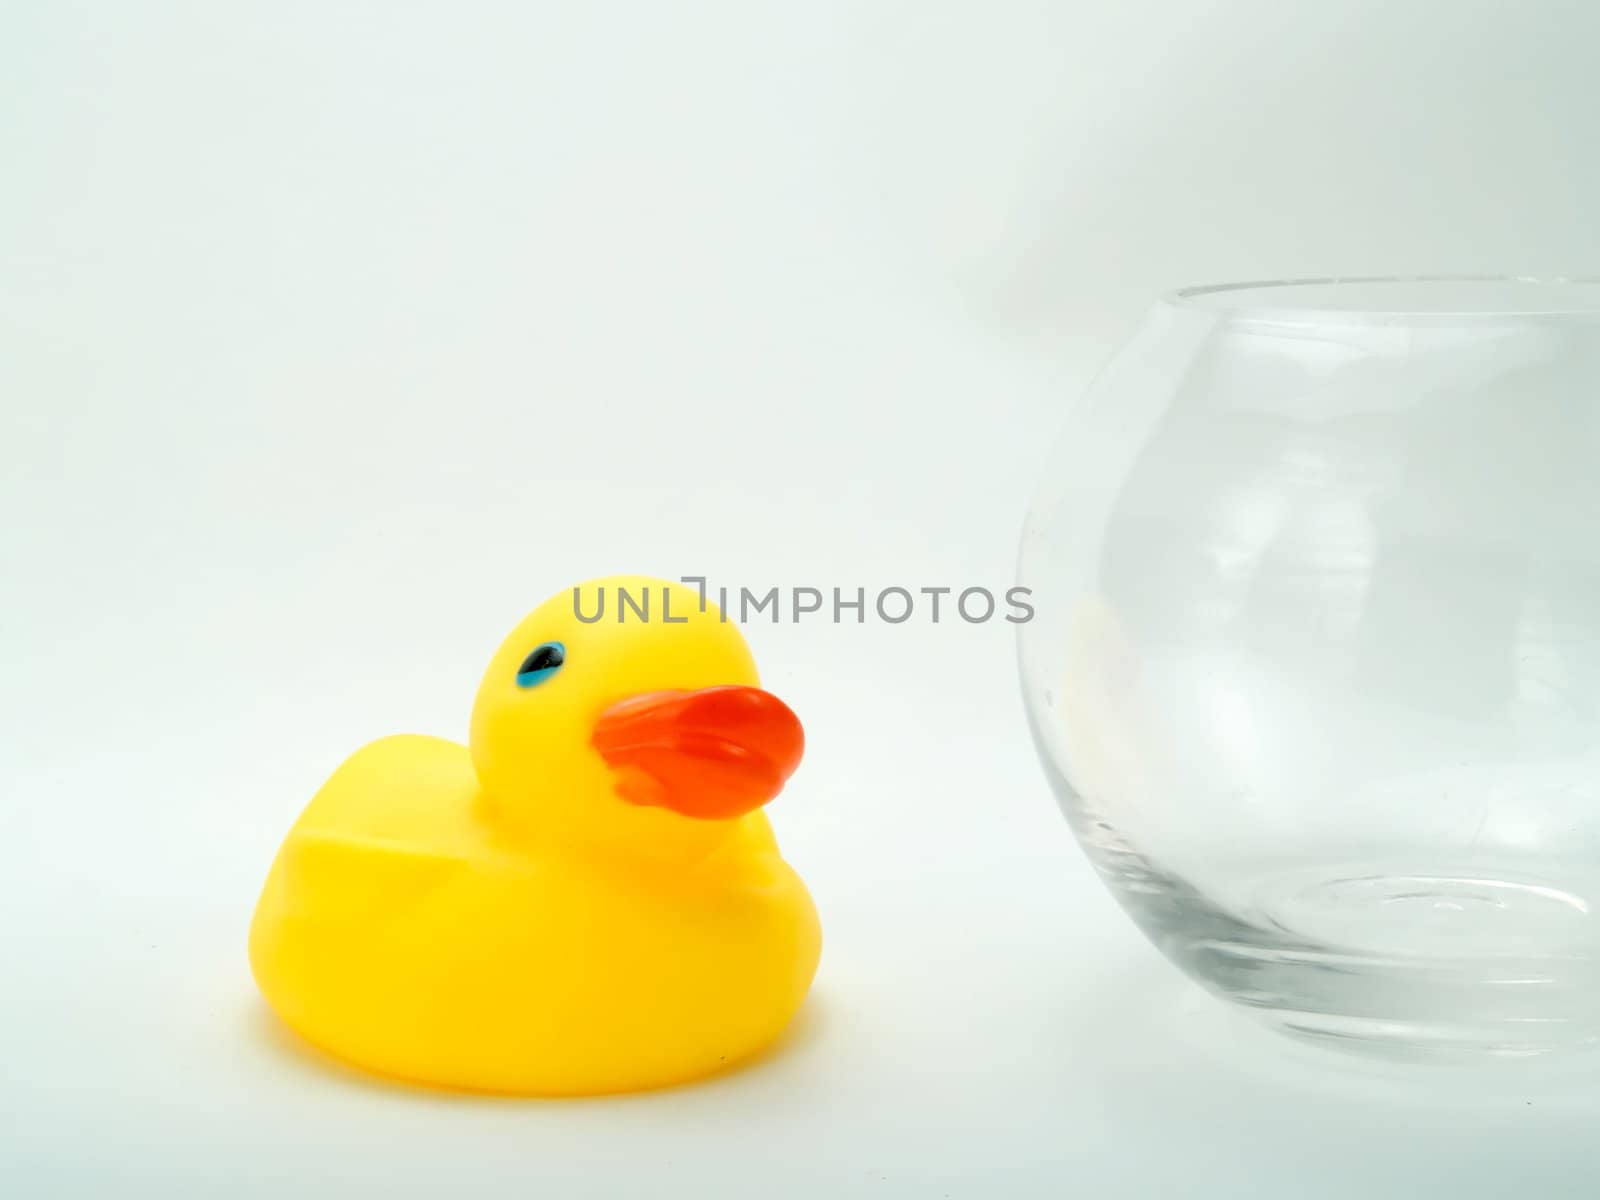 Rubber duck on a white background